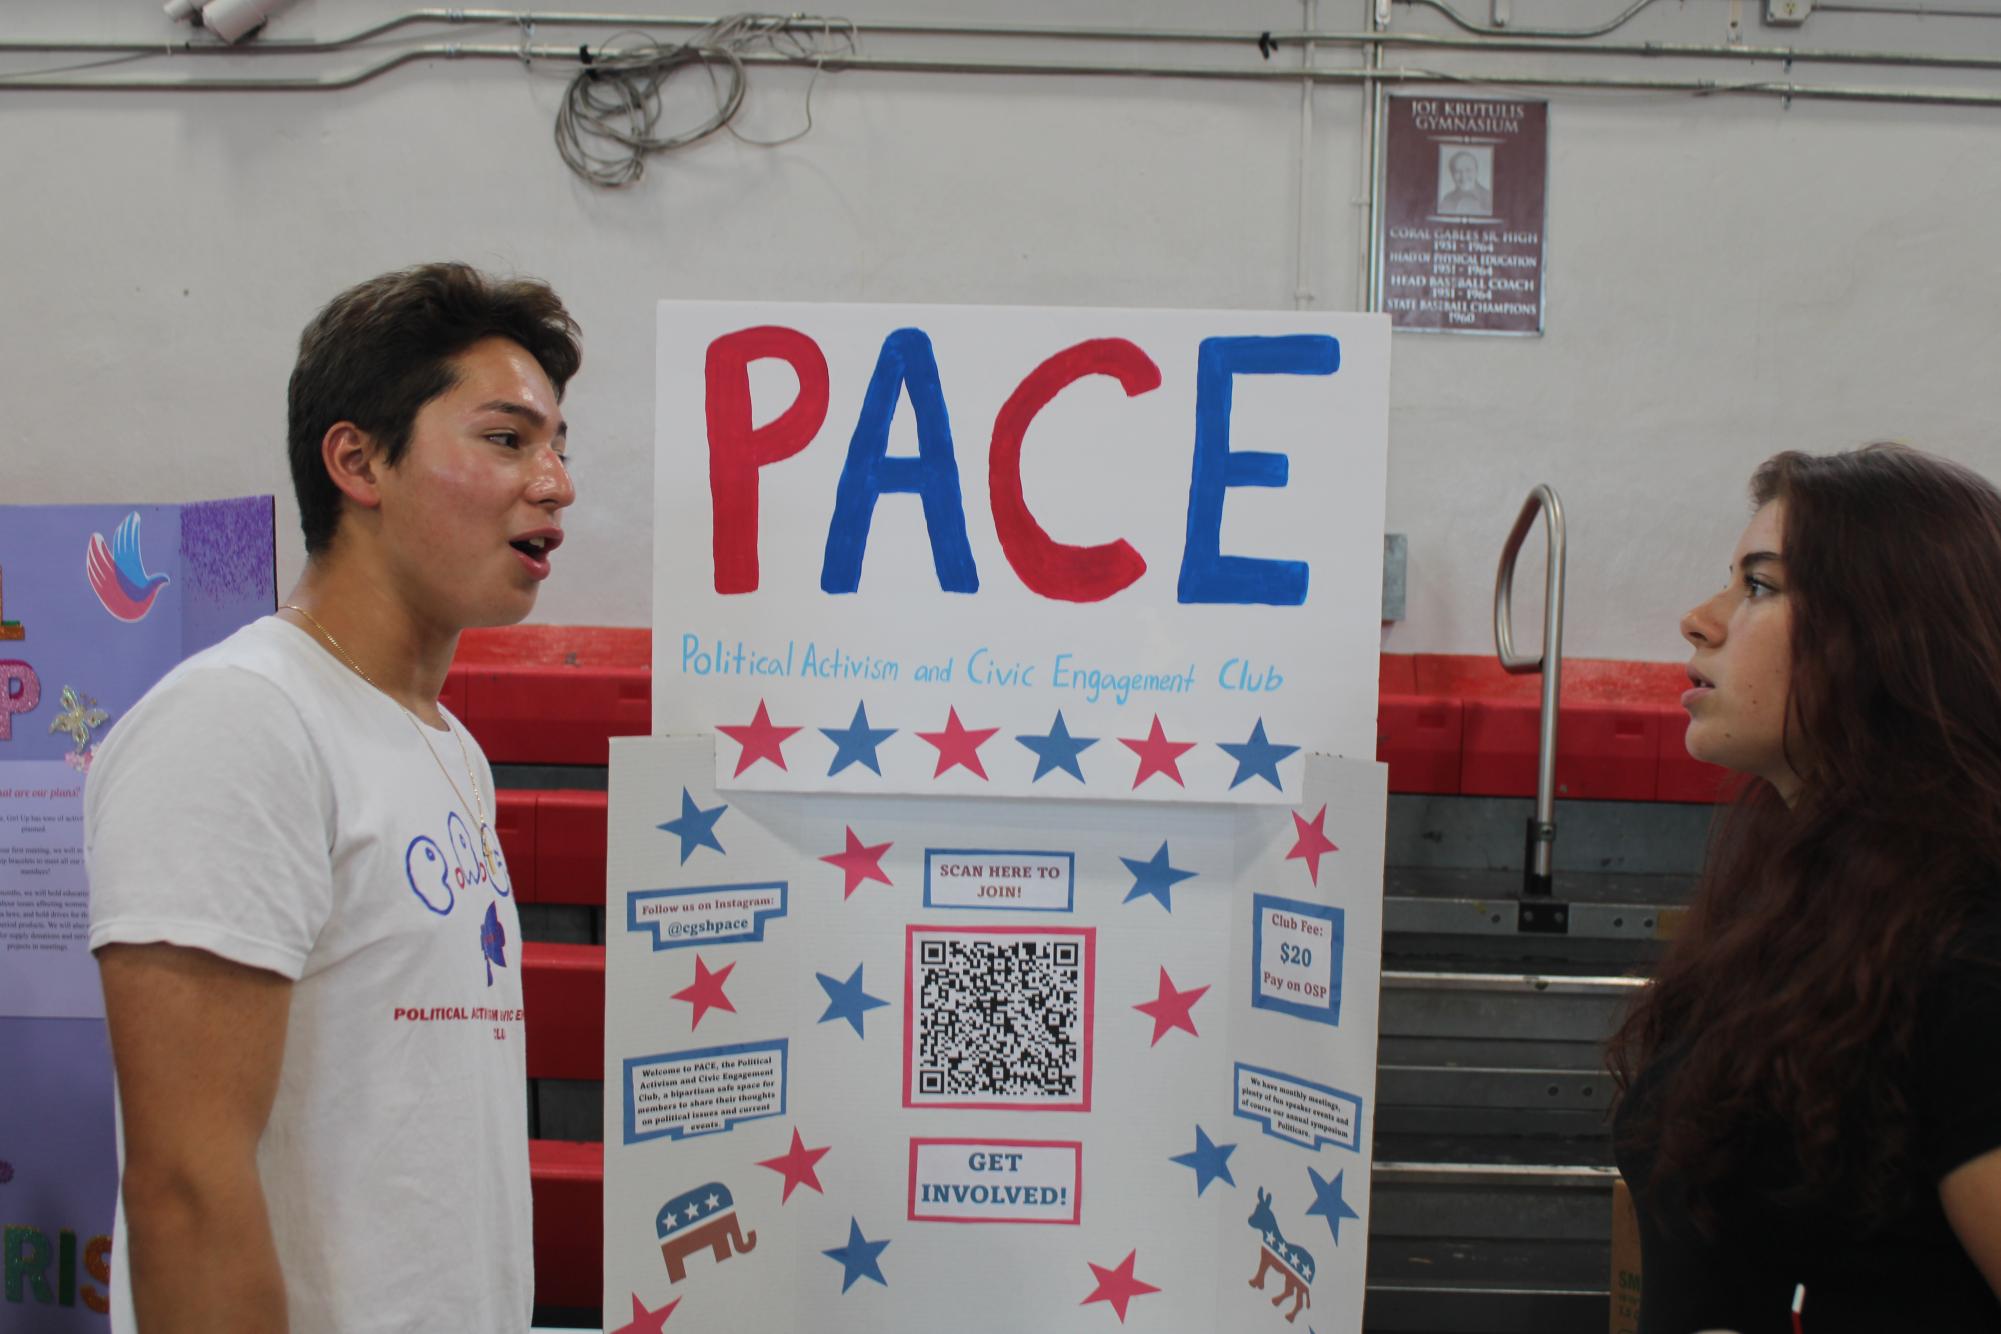 PACE is a club that allows students to get involved in the government, its actions and events without being able to vote.